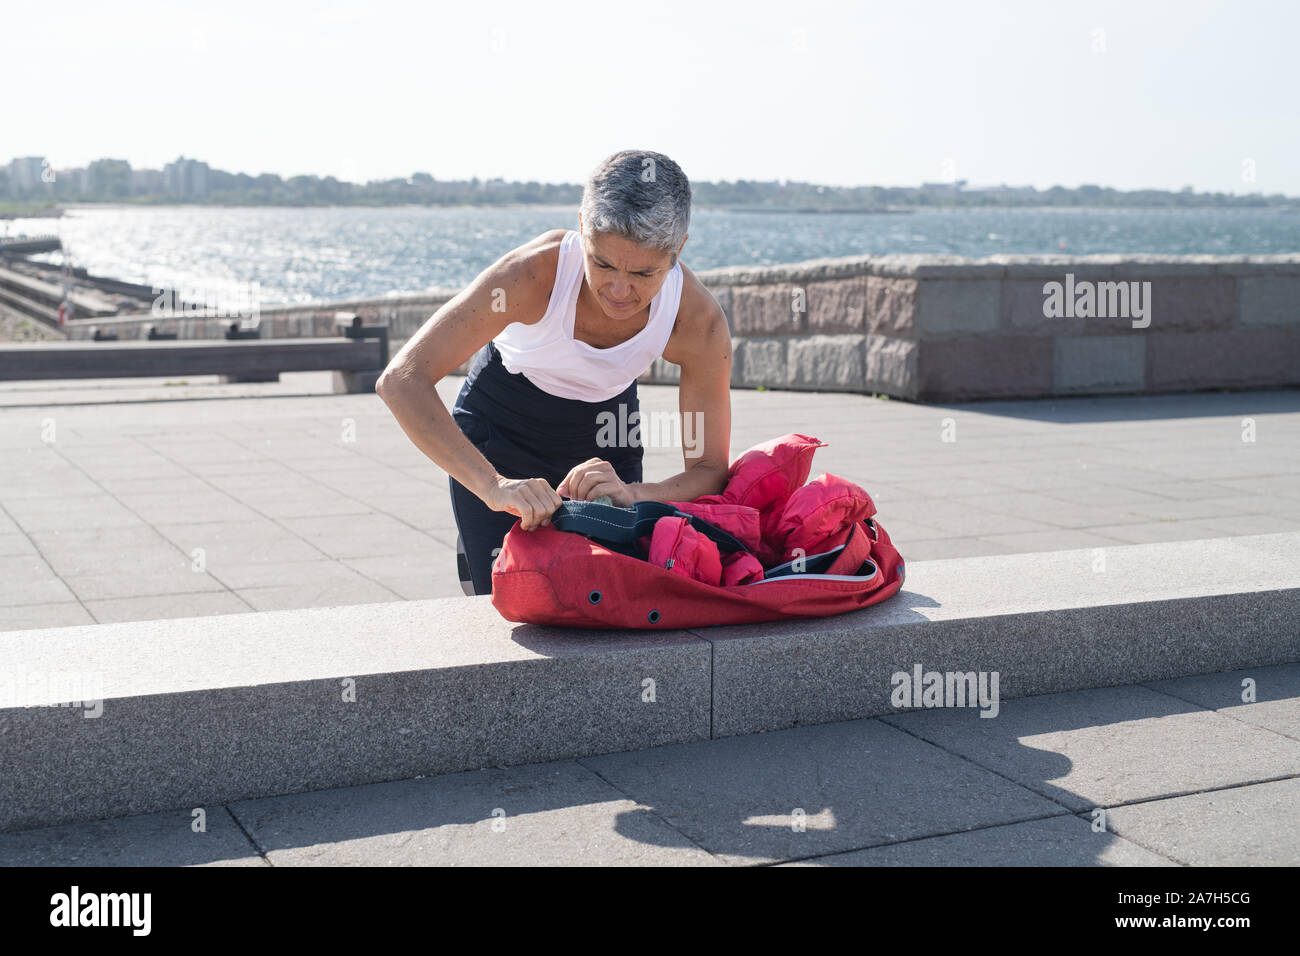 Middle-aged woman packing up yoga gear by ocean Stock Photo